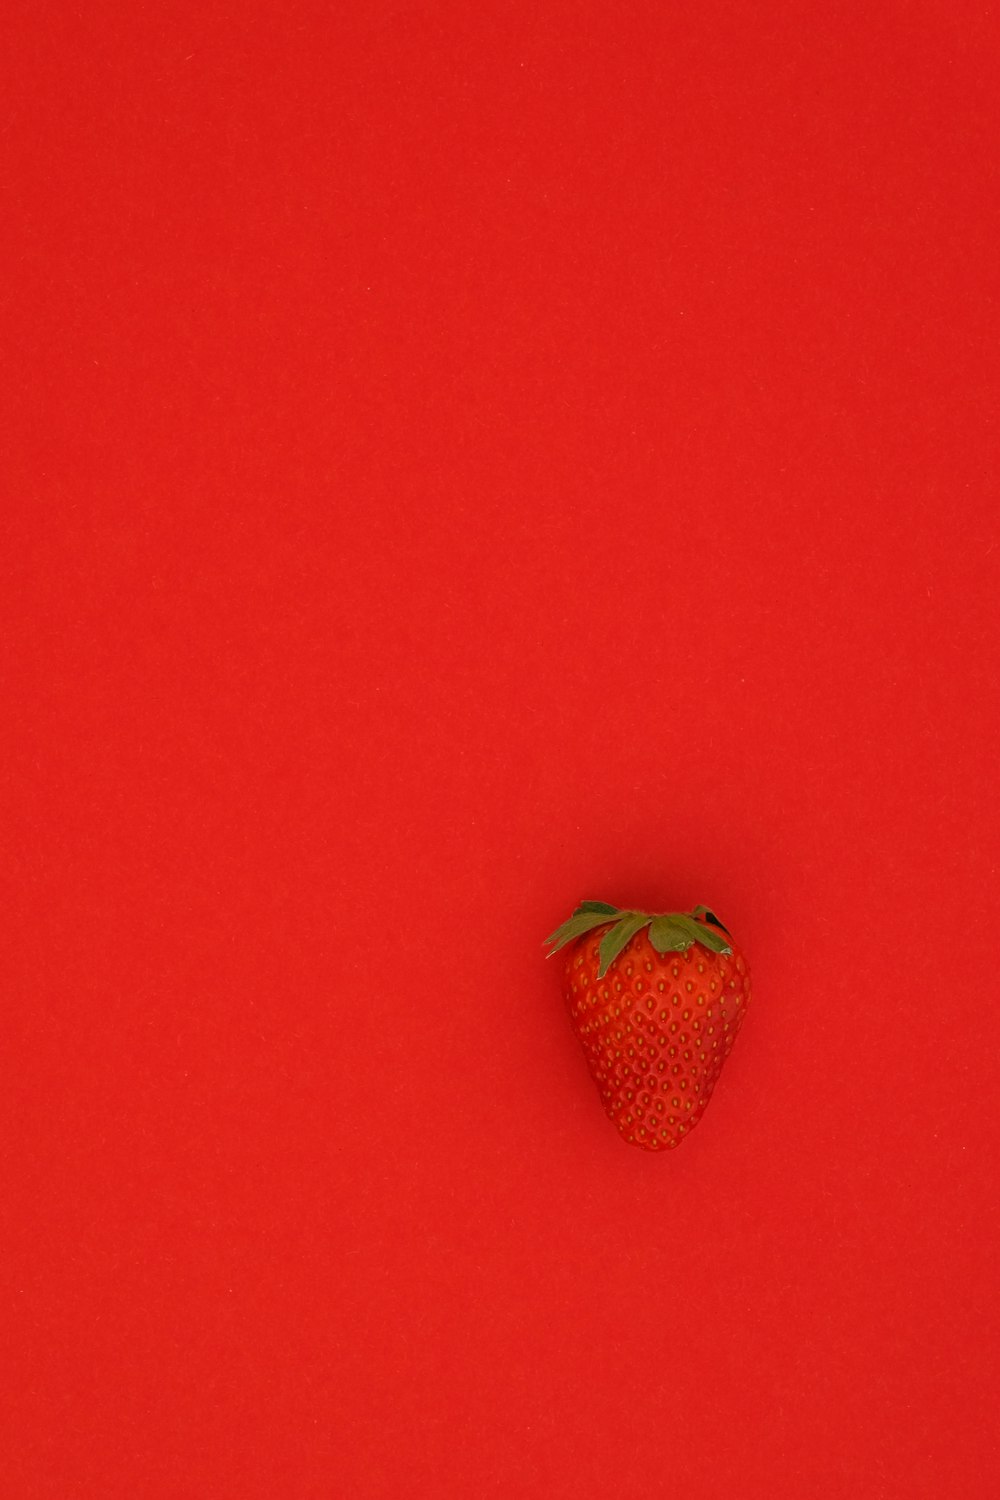 red strawberry fruit on red surface photo – Free Red Image on Unsplash